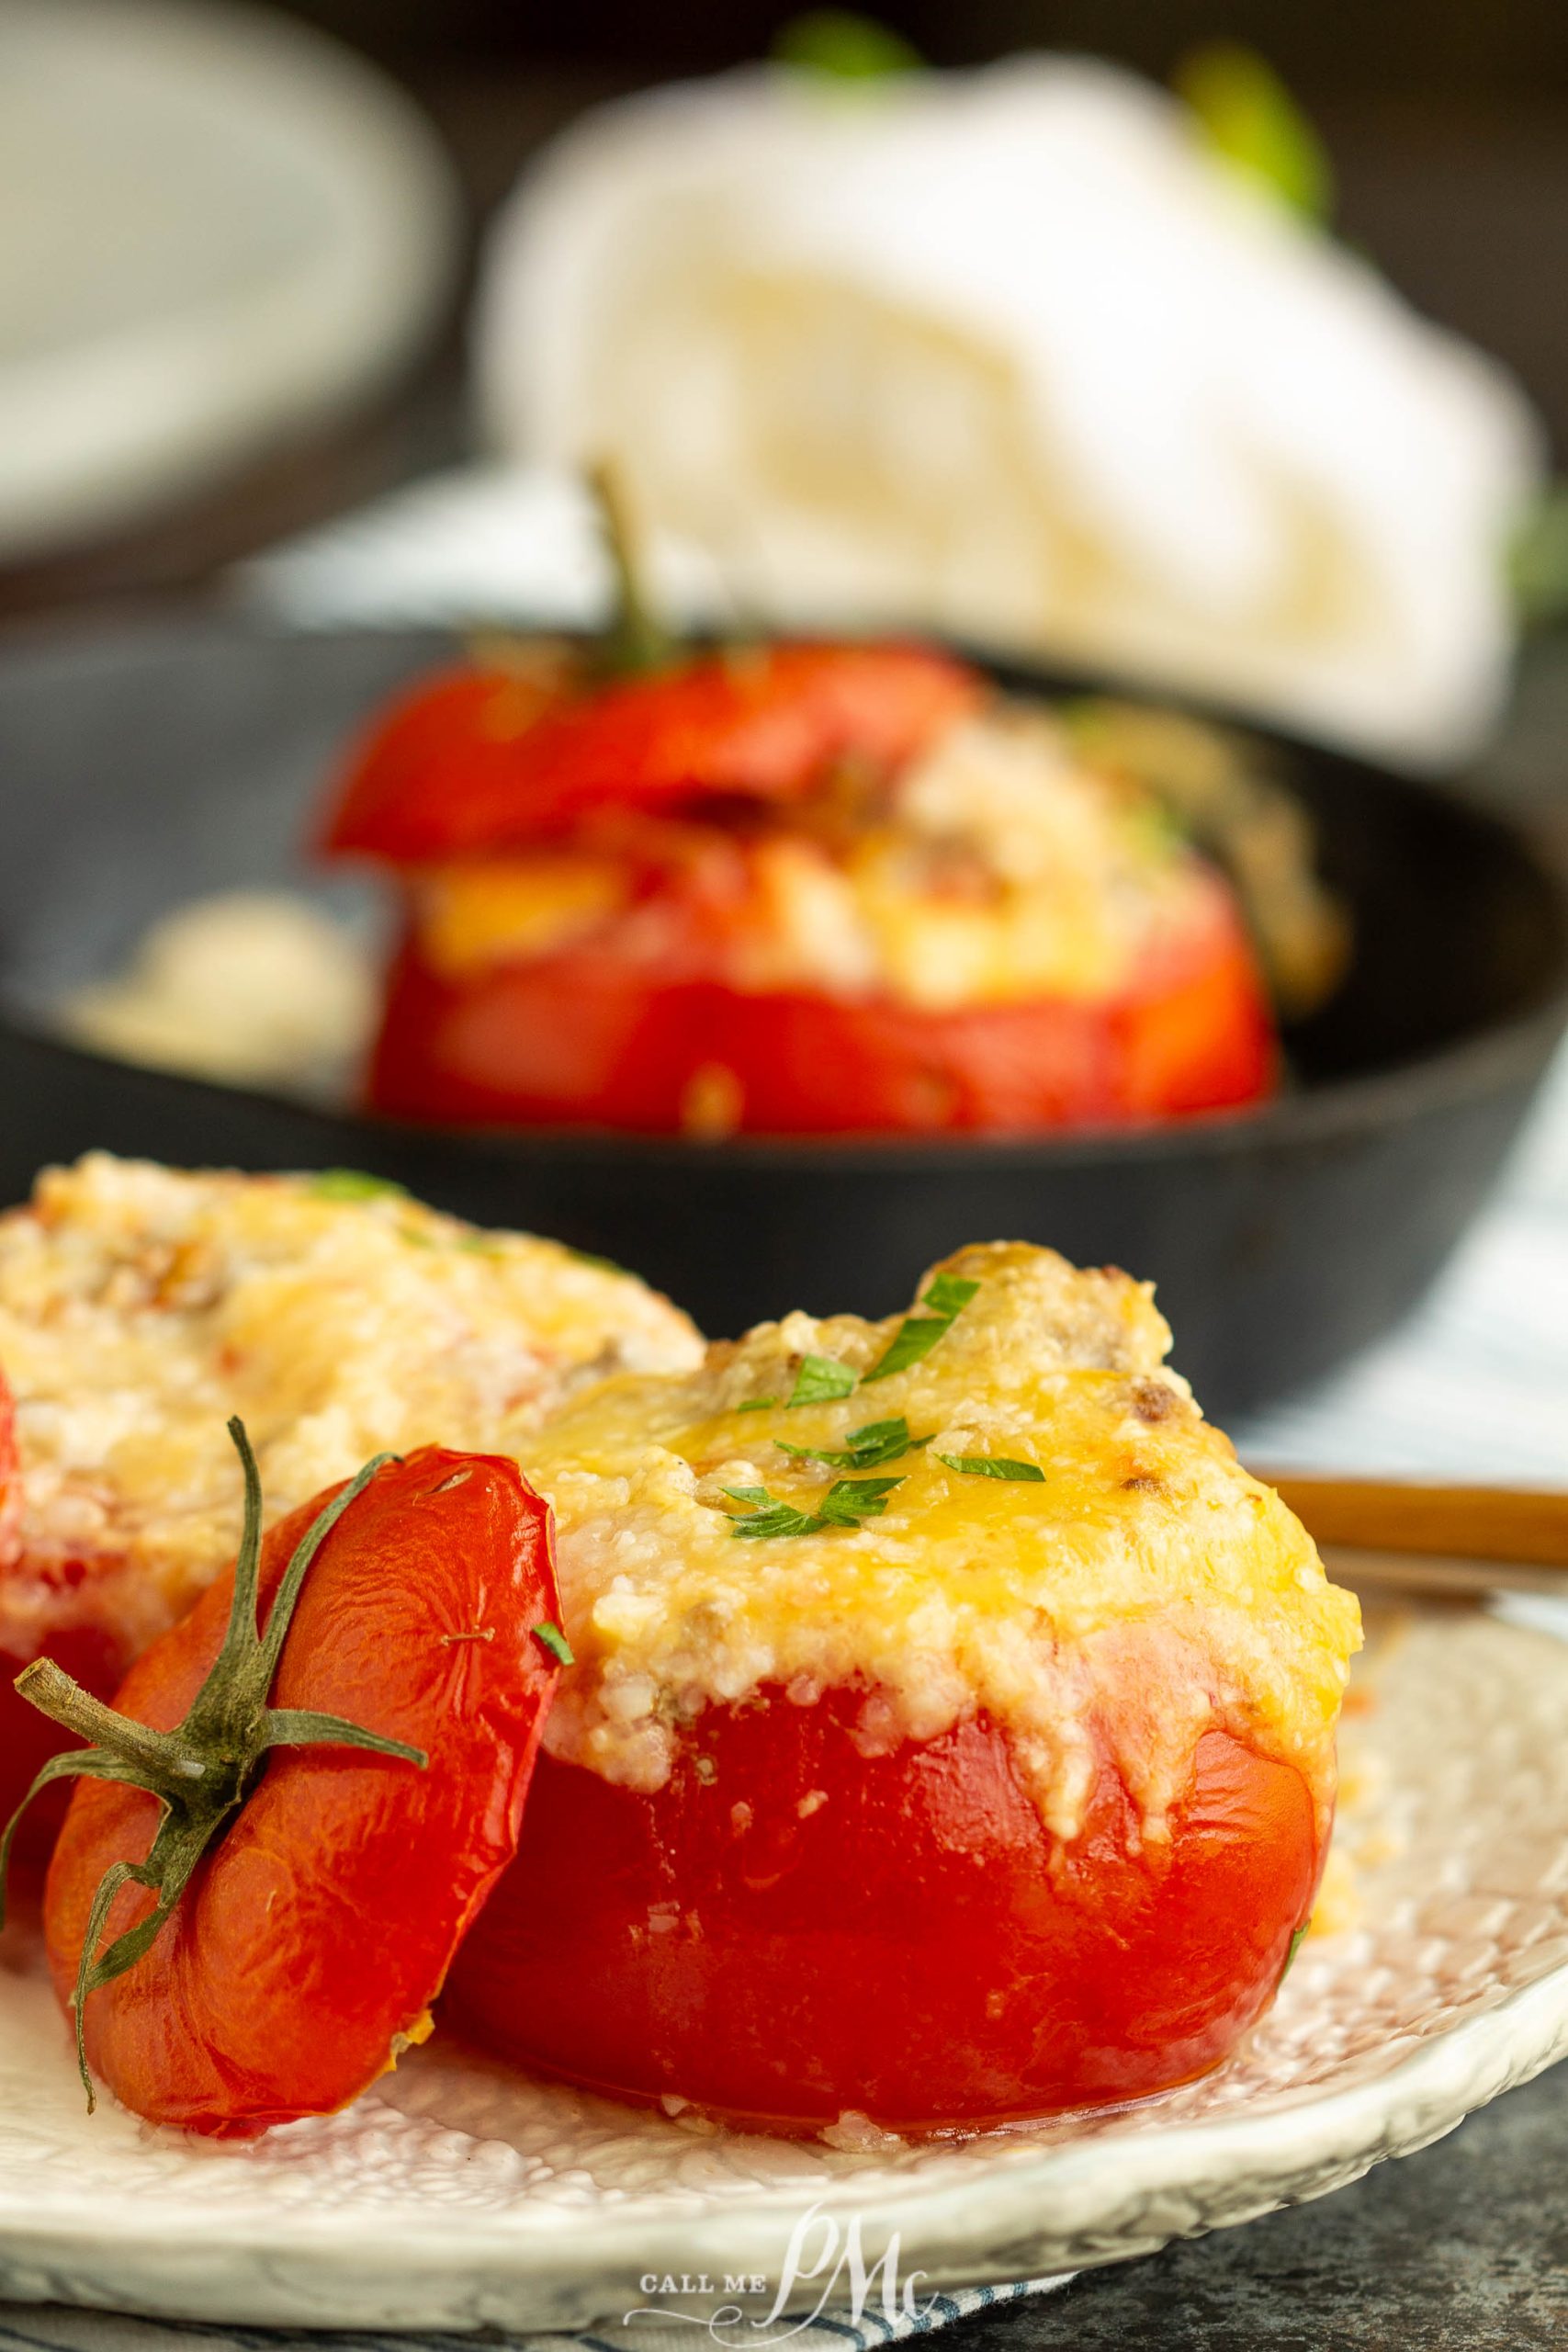 Grits Casserole Stuffed Baked Tomatoes, Stuffed tomatoes with cheese and herbs on a plate.